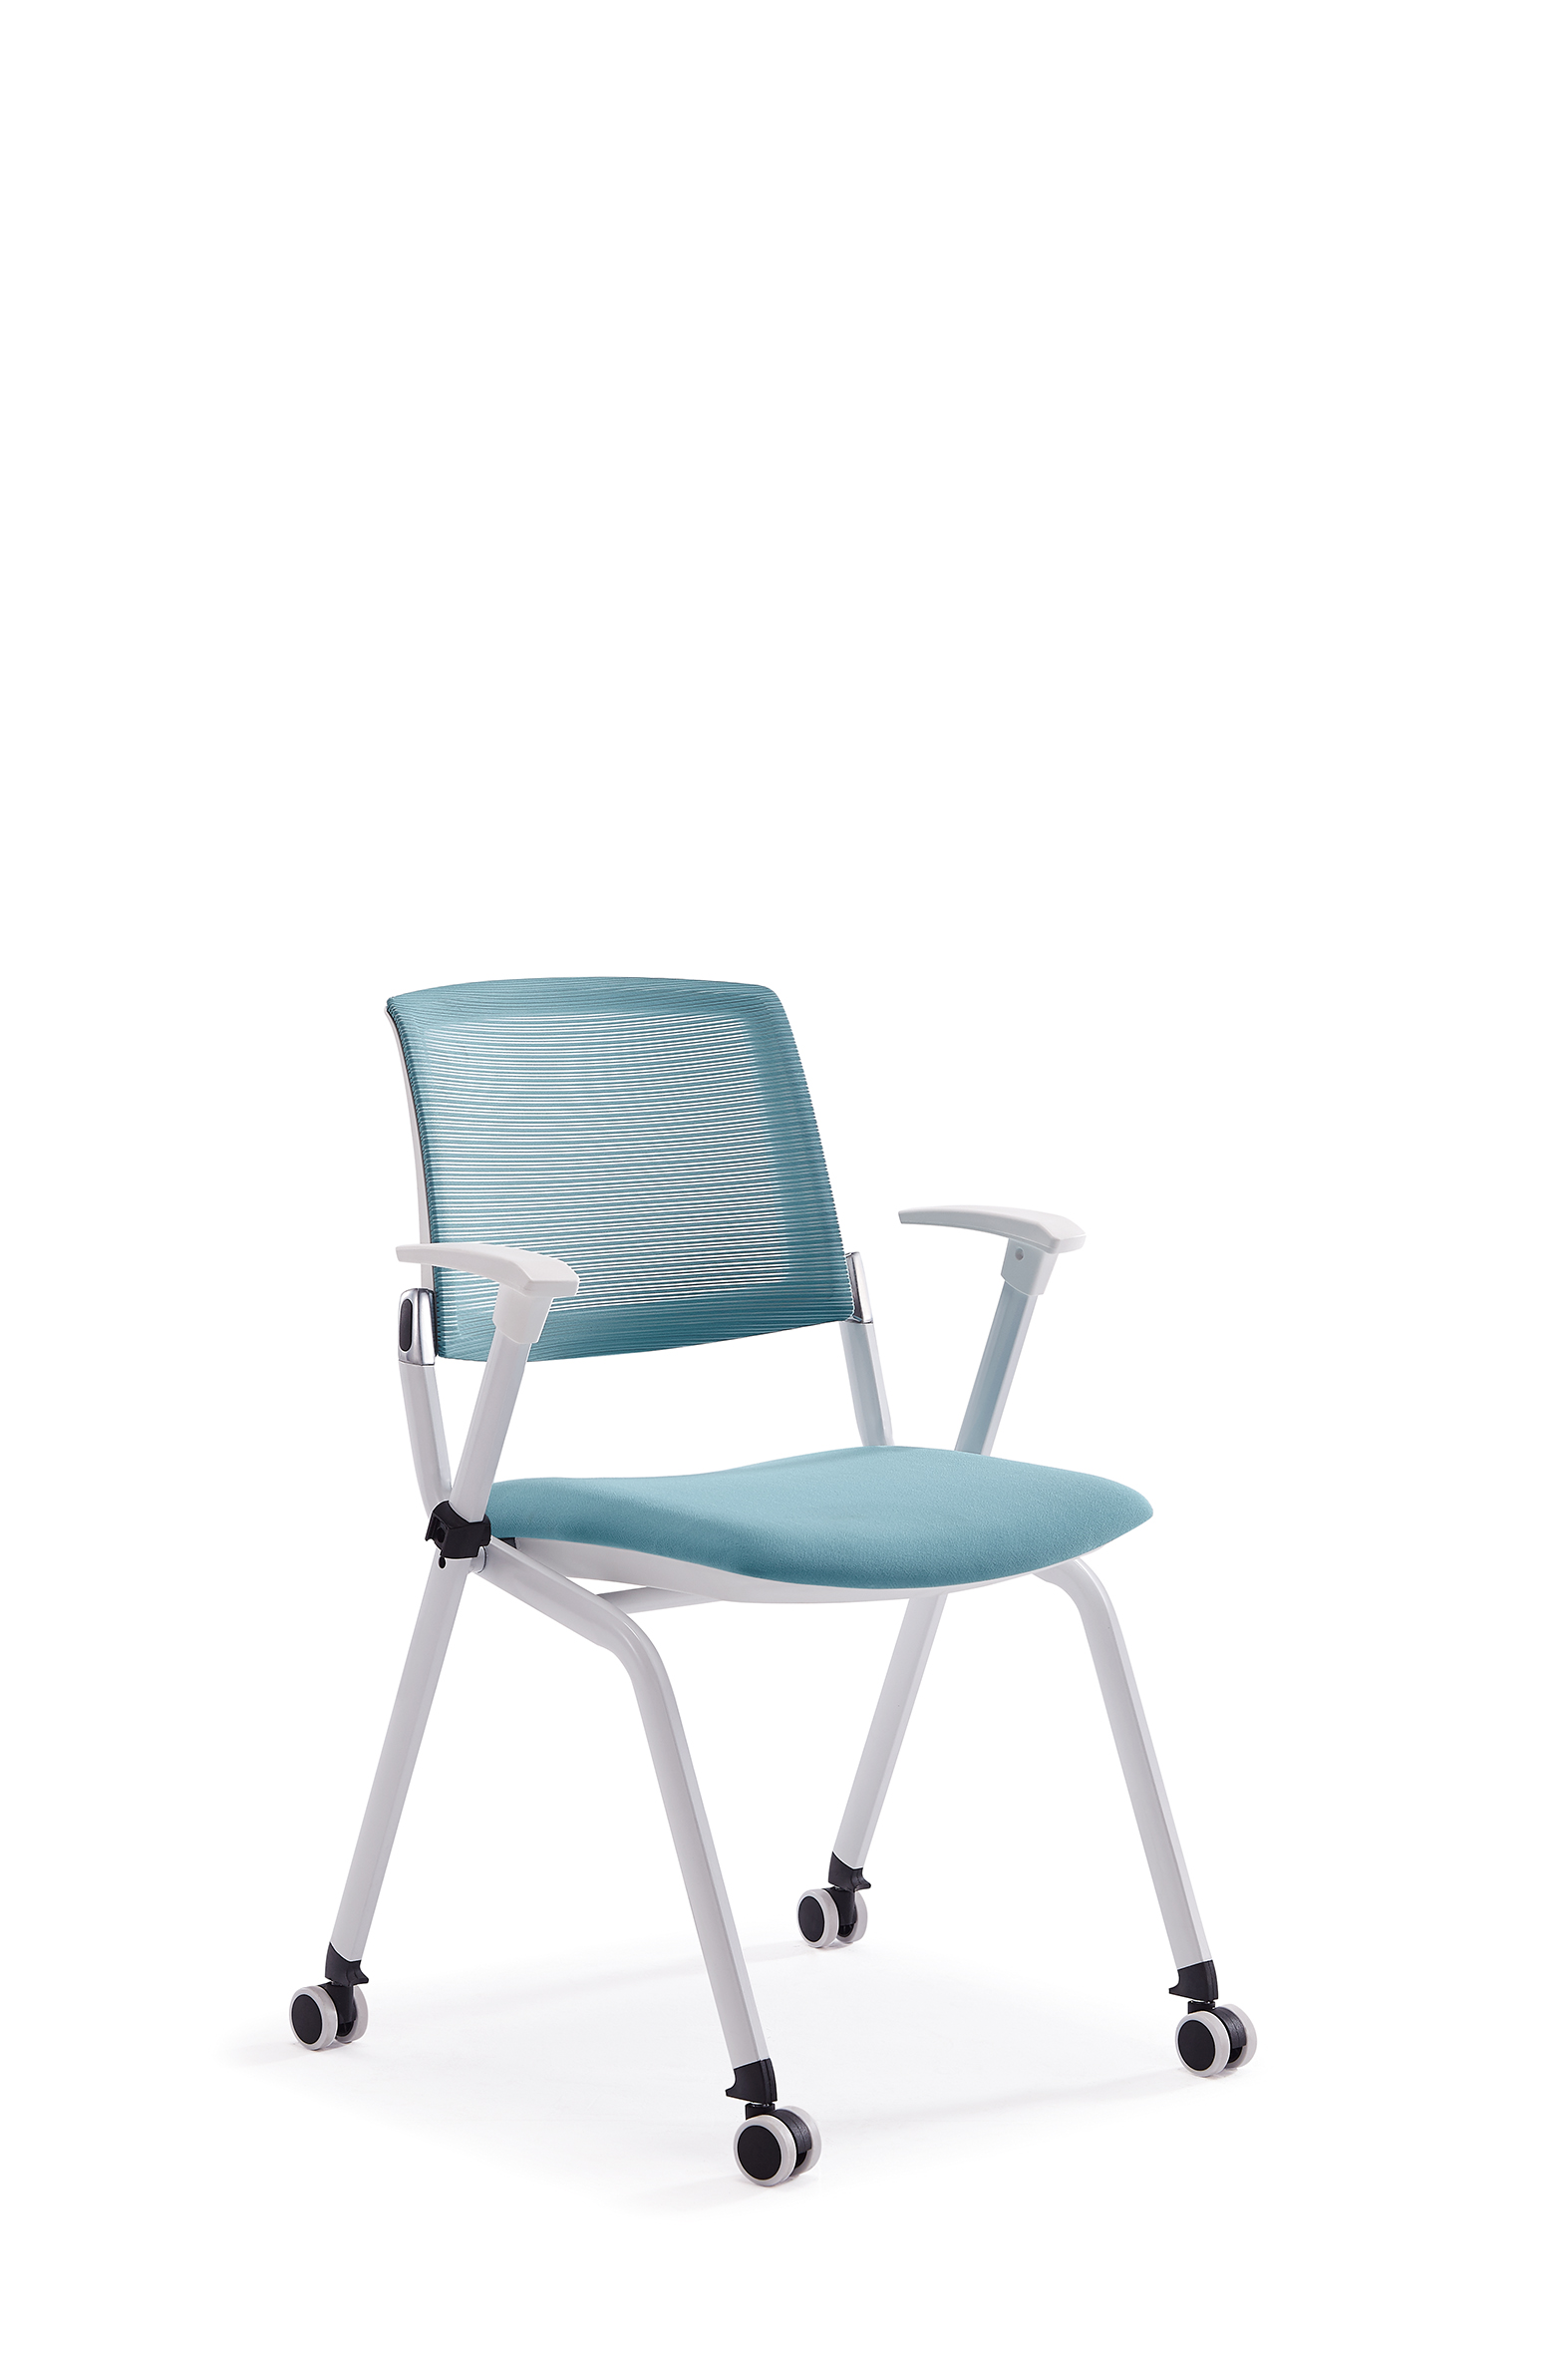 Newcity 1531 Economic Training Chair Hot Sale School Attached Writing TableTraining Chair Modern Fashion Training Chair With PP Armrest Supplier Chinese Foshan